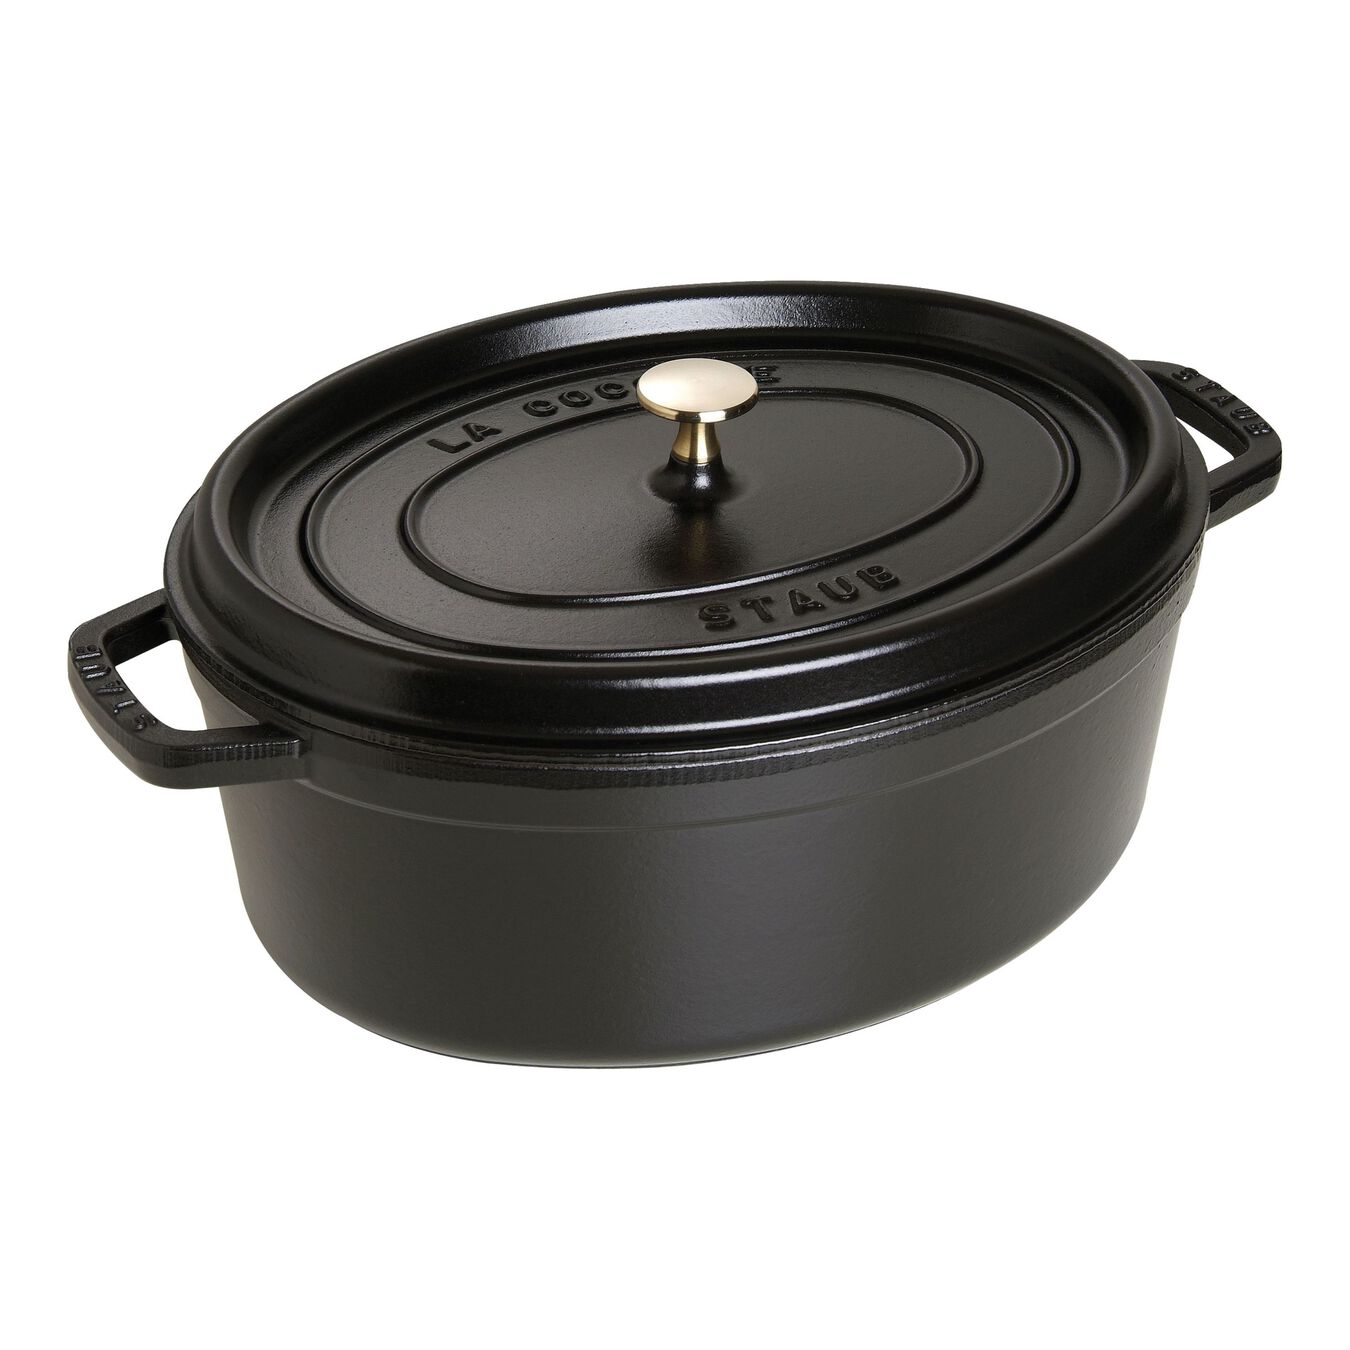 6.75 l cast iron oval Cocotte, black - Visual Imperfections,,large 1